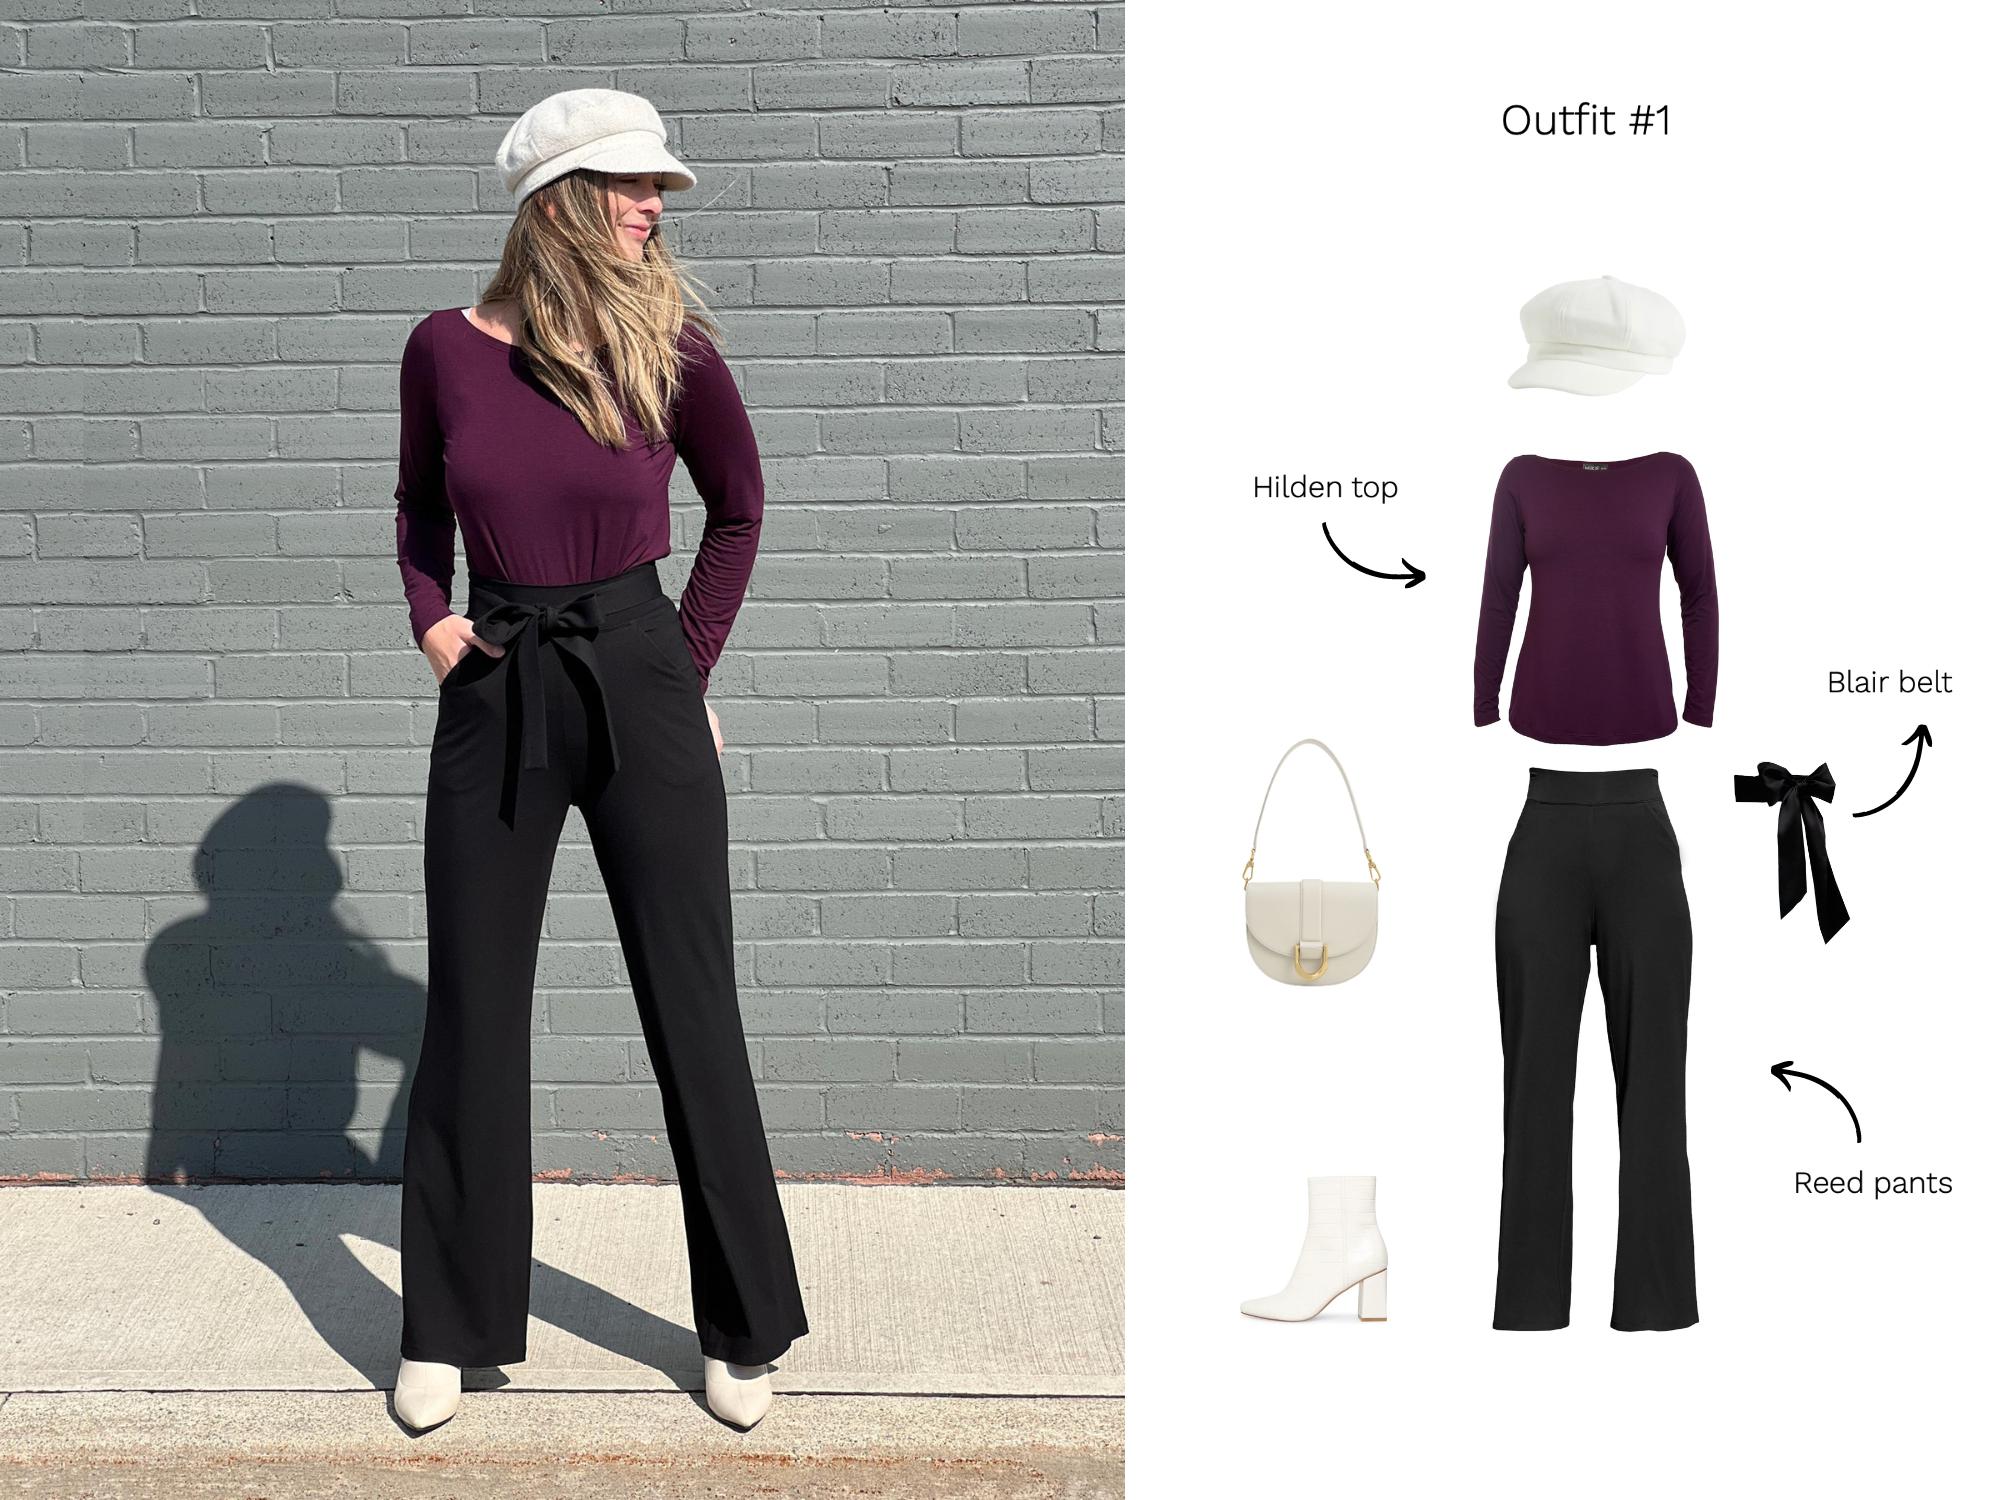 Outfit inspirations for how to style dress pants